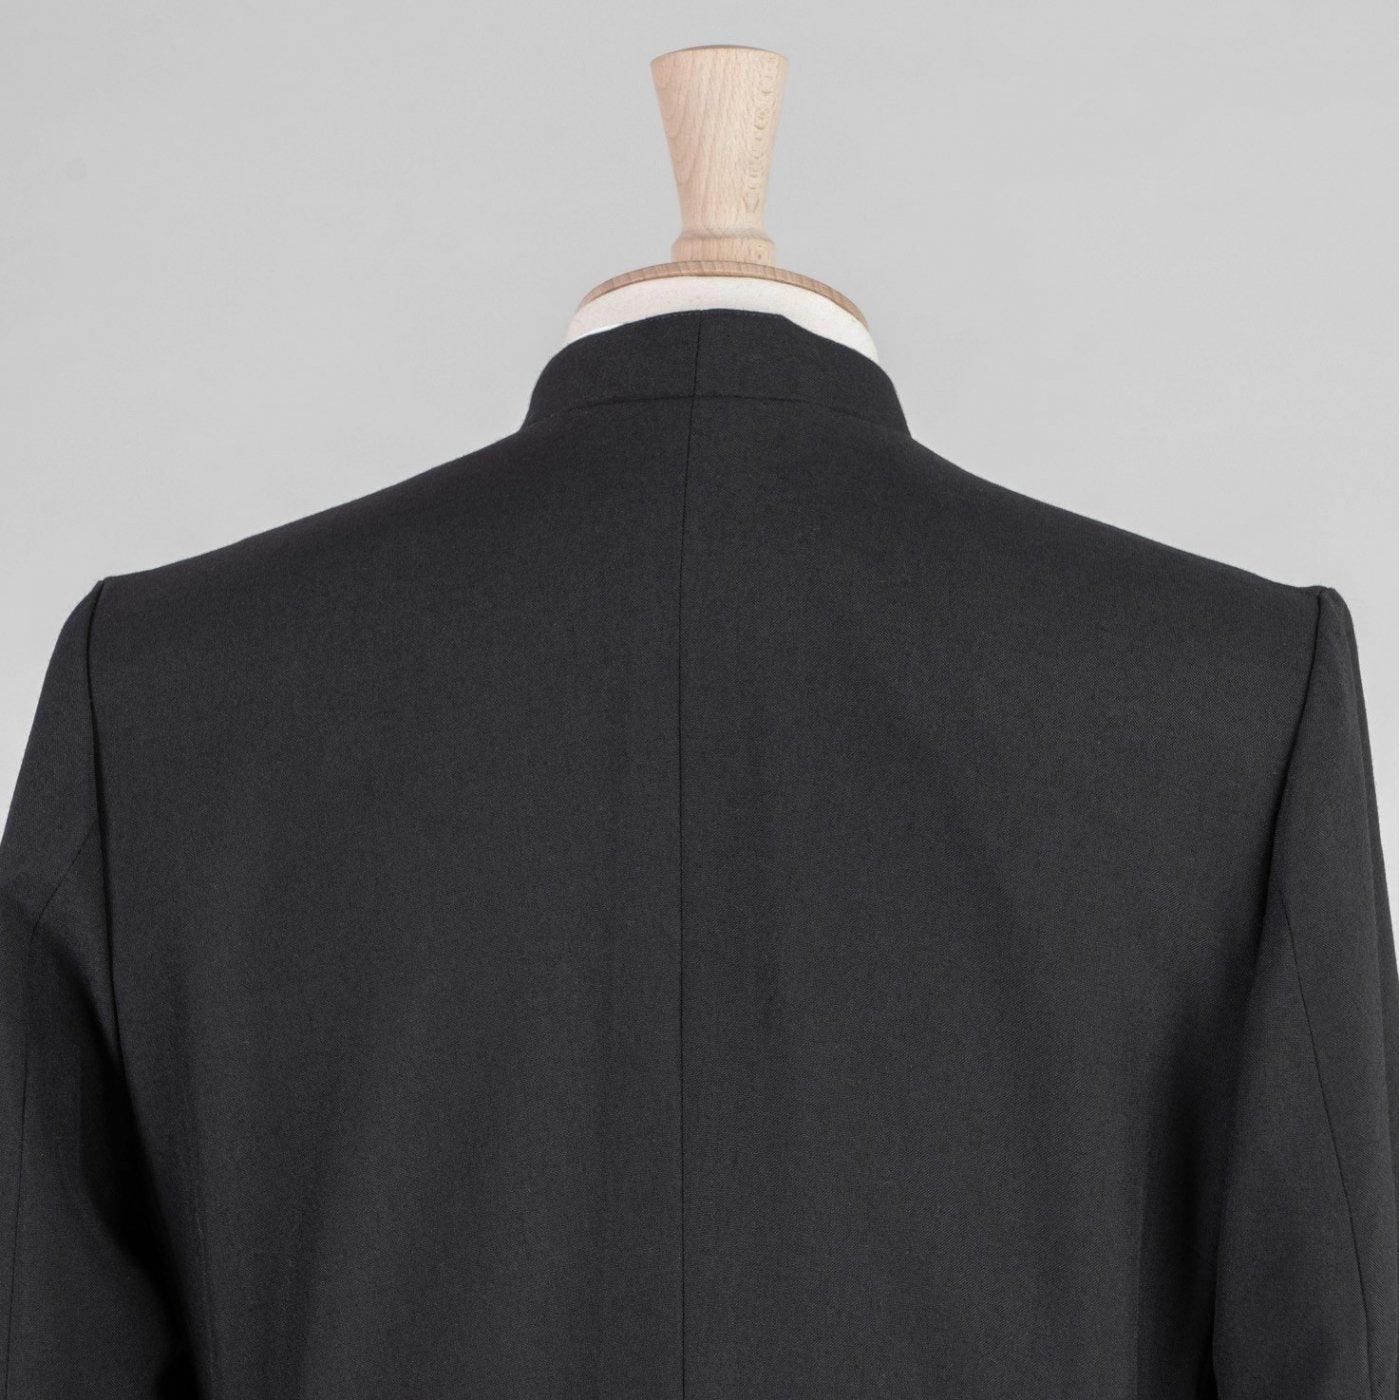 Men's Single-Breasted Cassock in Medium Weight Pure Wool - Watts & Co.